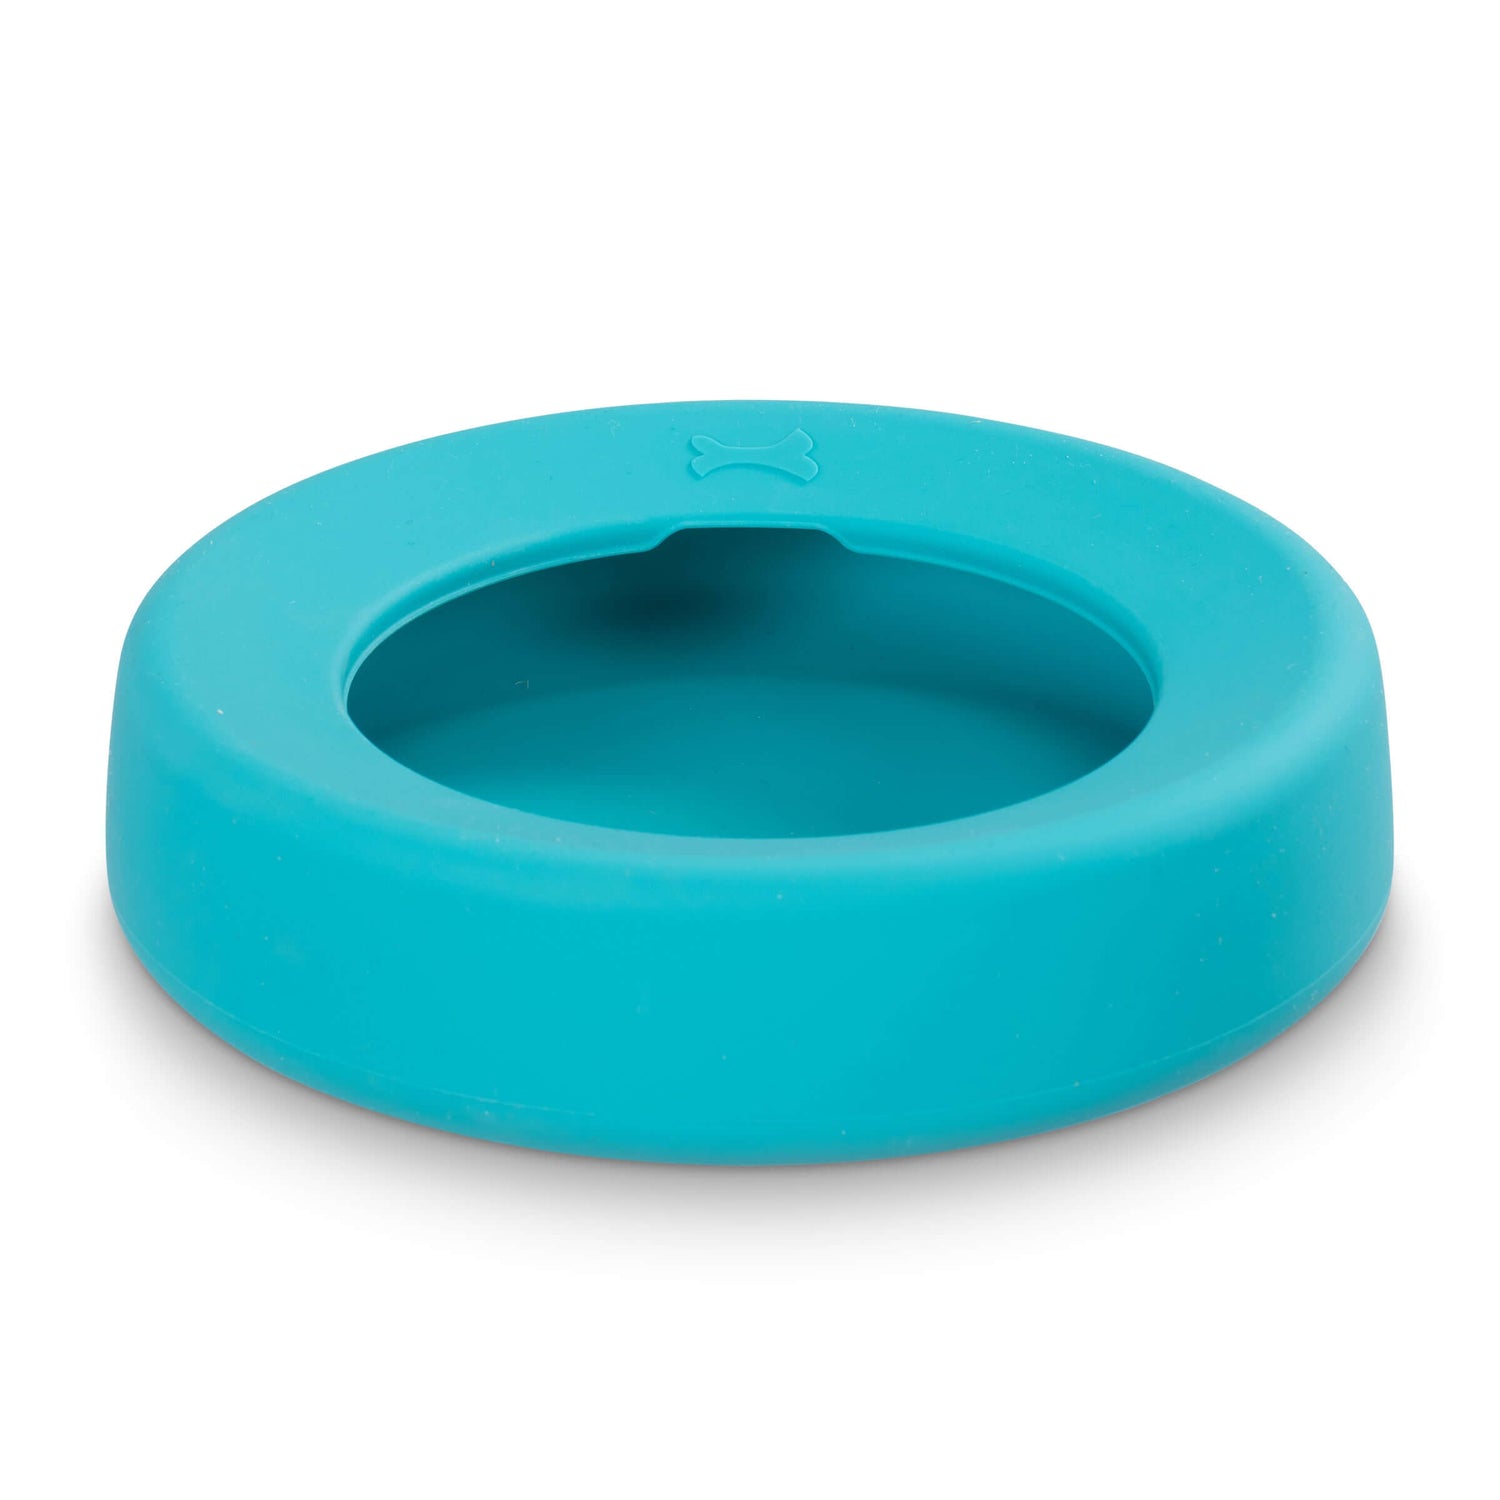 Blue No spill travel dog bowl.  Easy to clean silicone. 